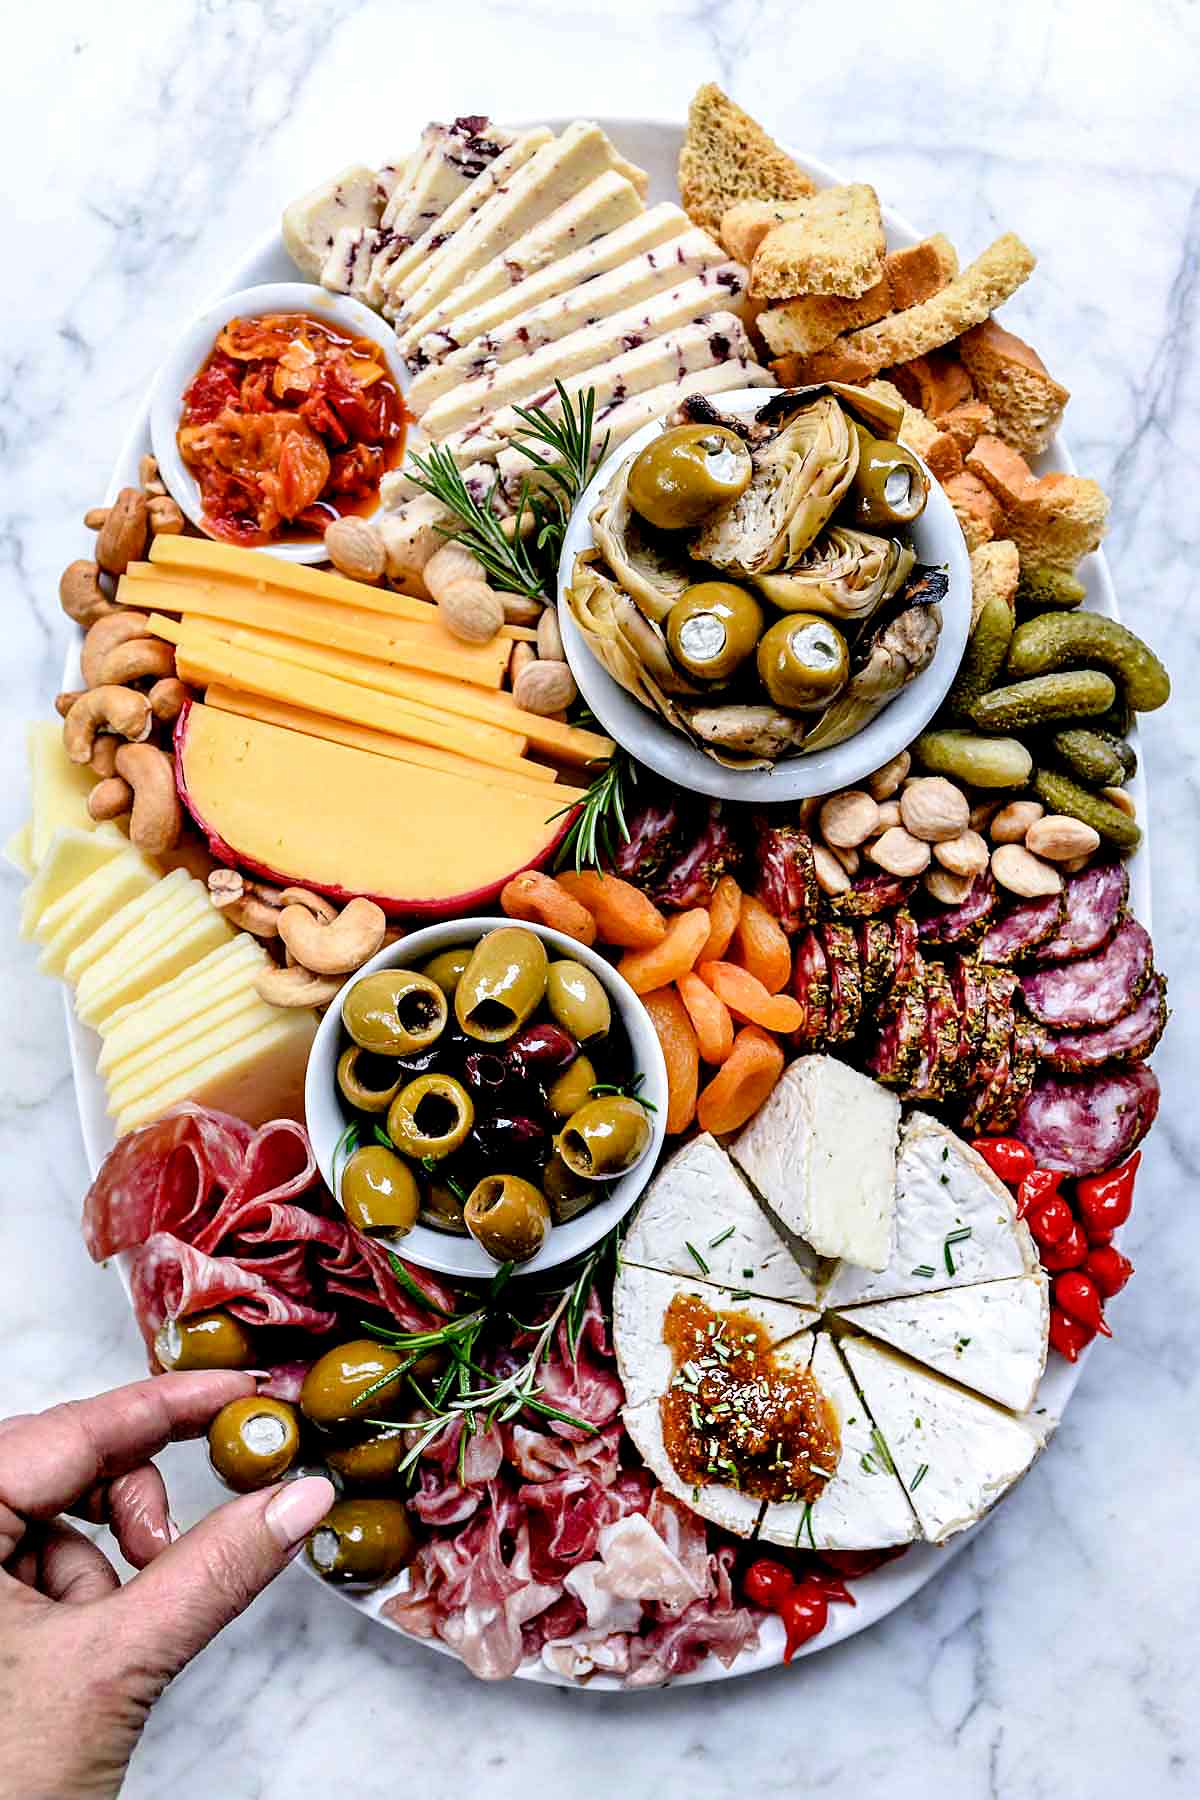 How to Make an Instagram-Worthy Charcuterie Board - foodiecrush .com